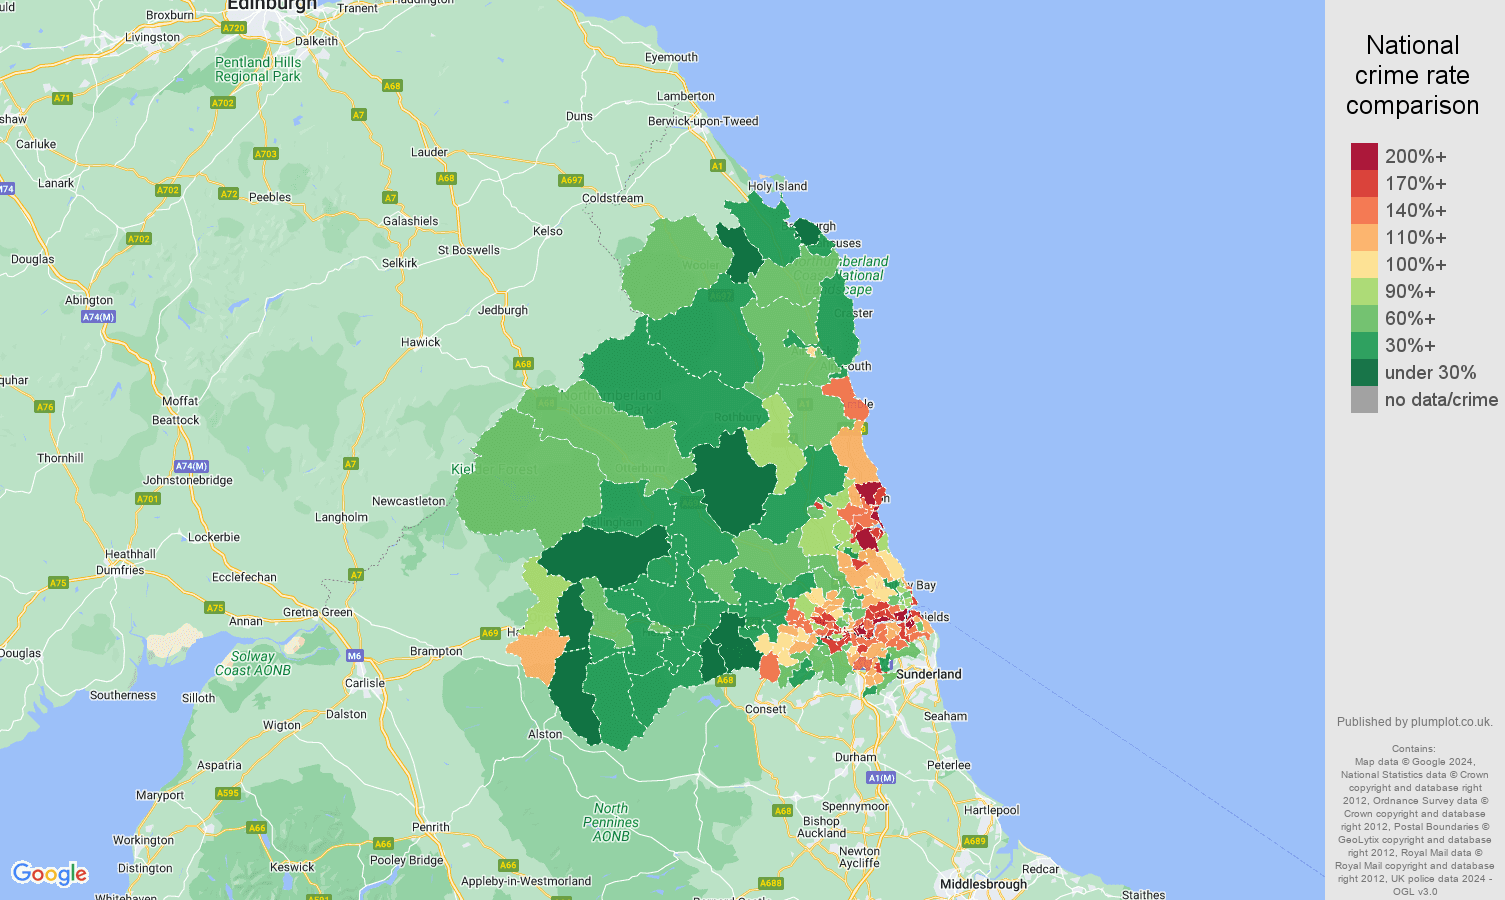 Newcastle upon Tyne crime rate comparison map